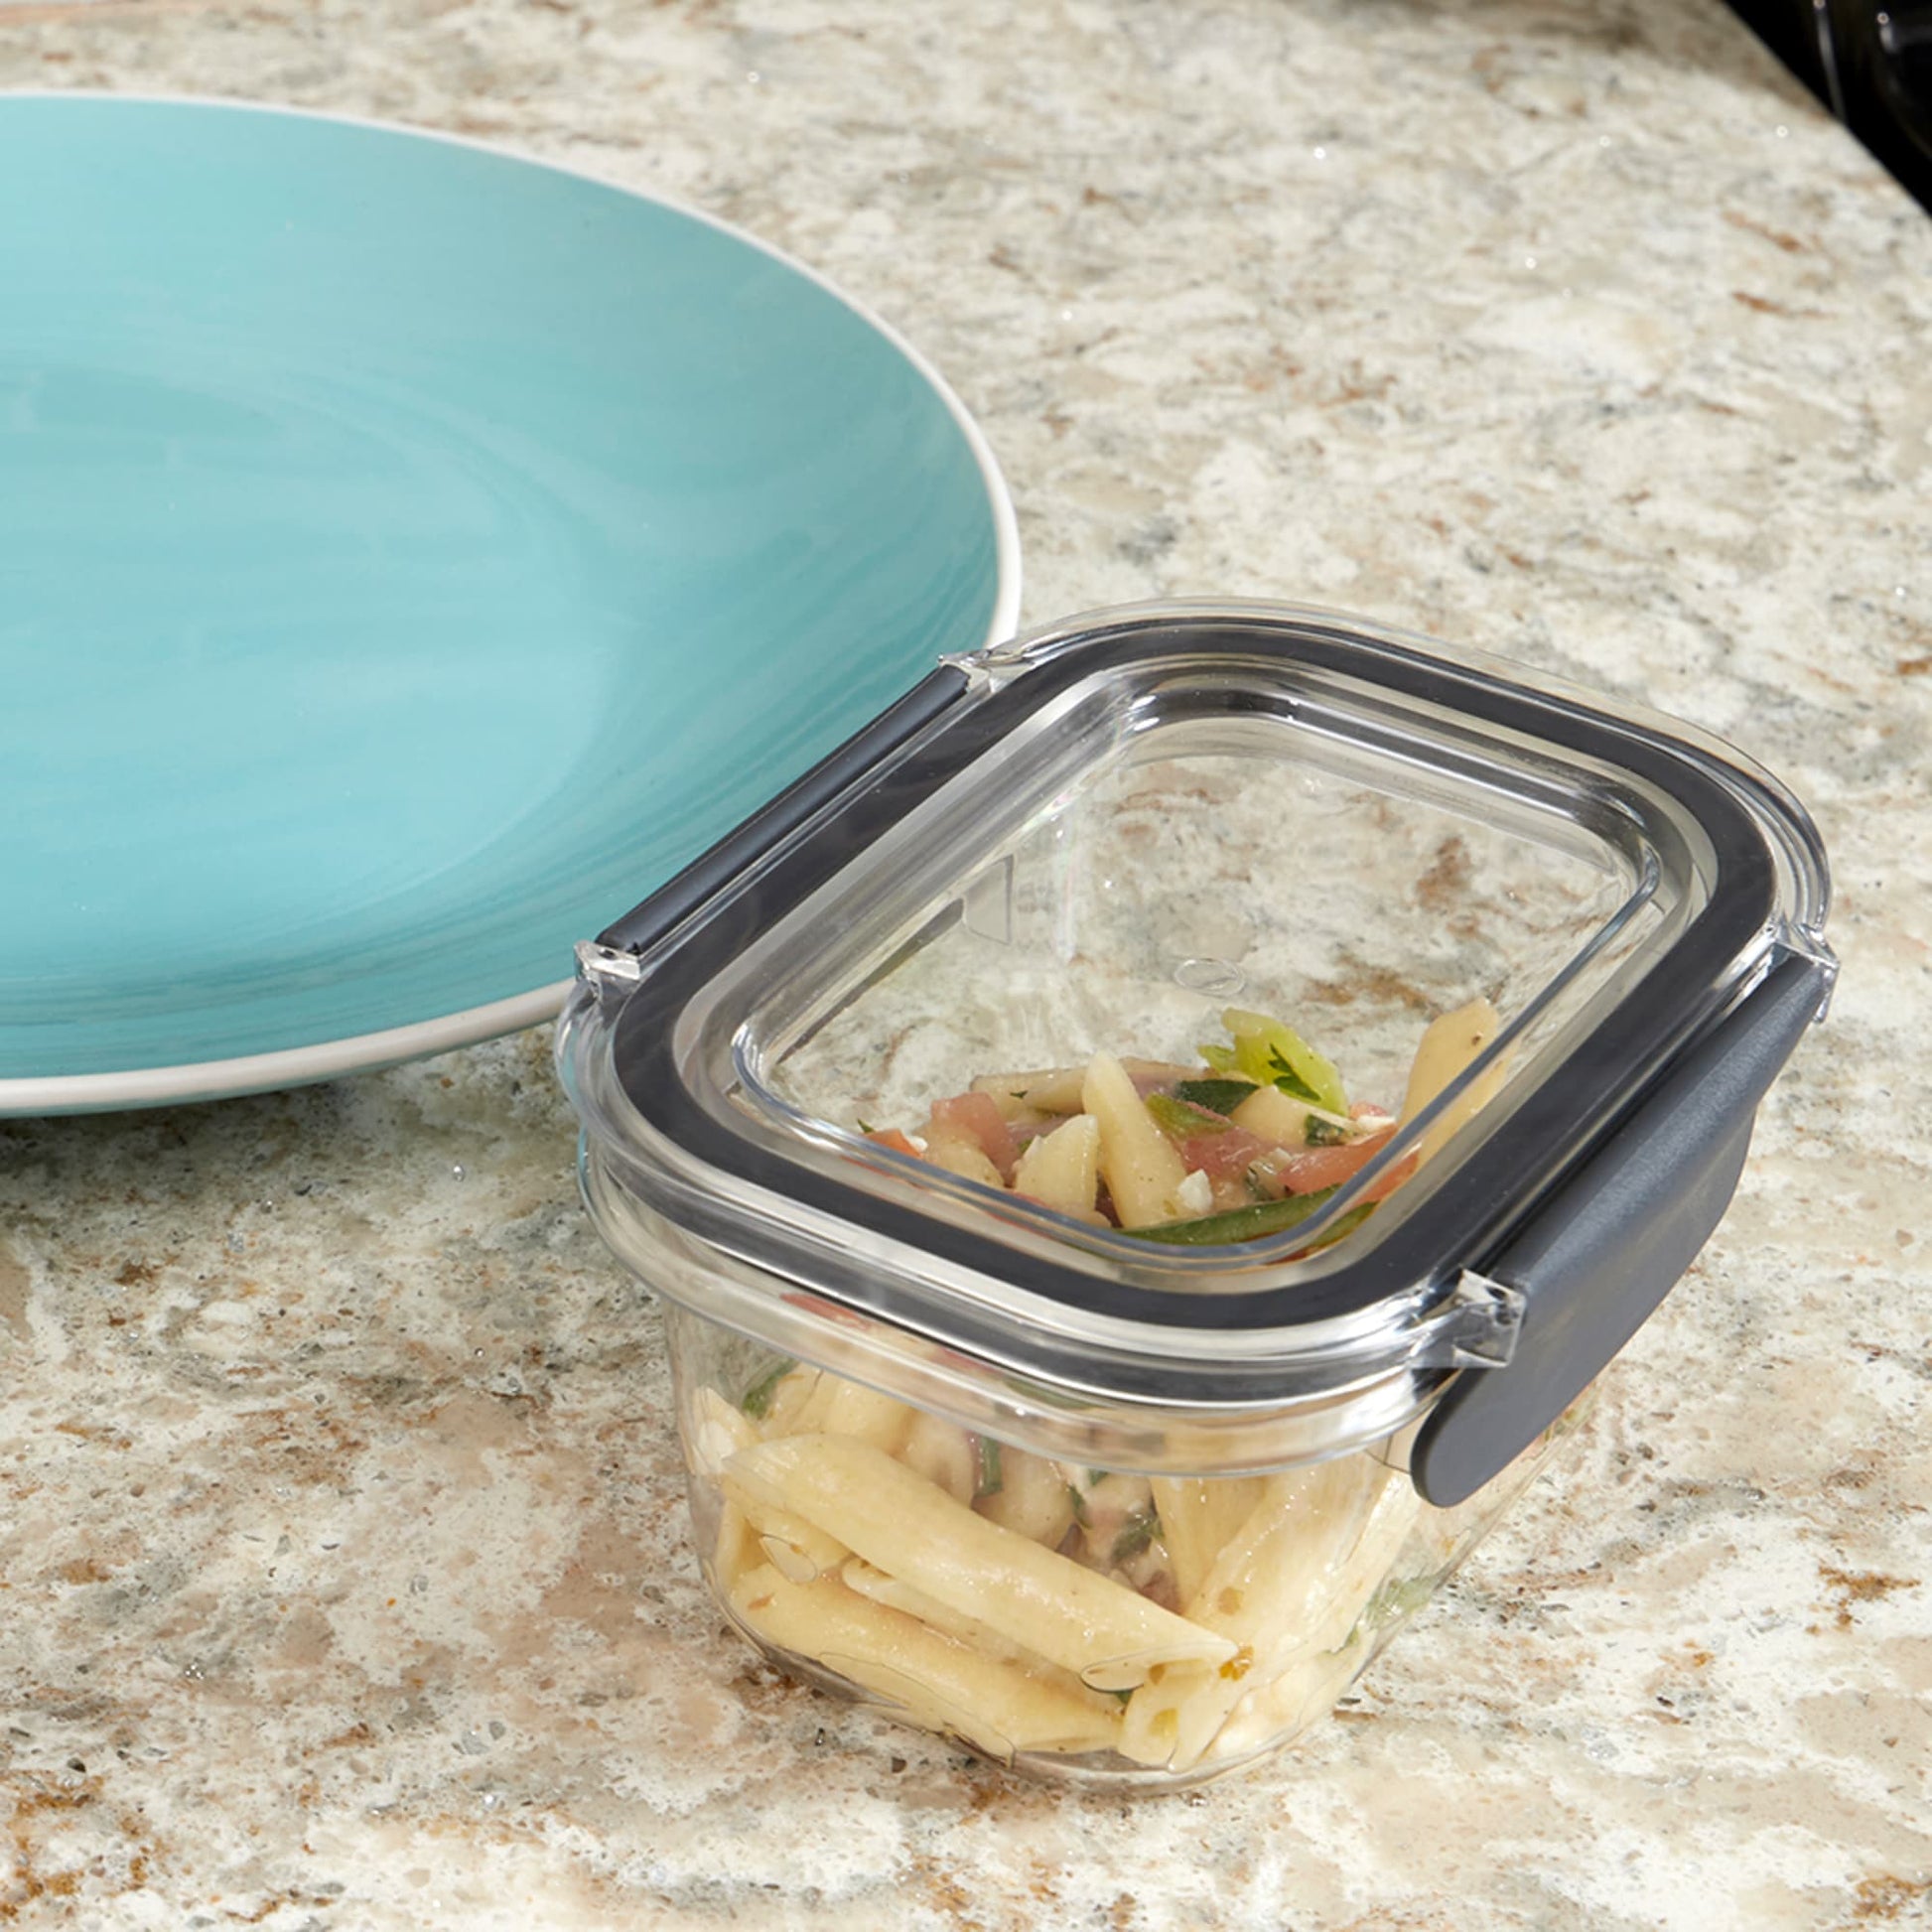  OTOR 12oz Meal Prep Food Container Sets with Airtight